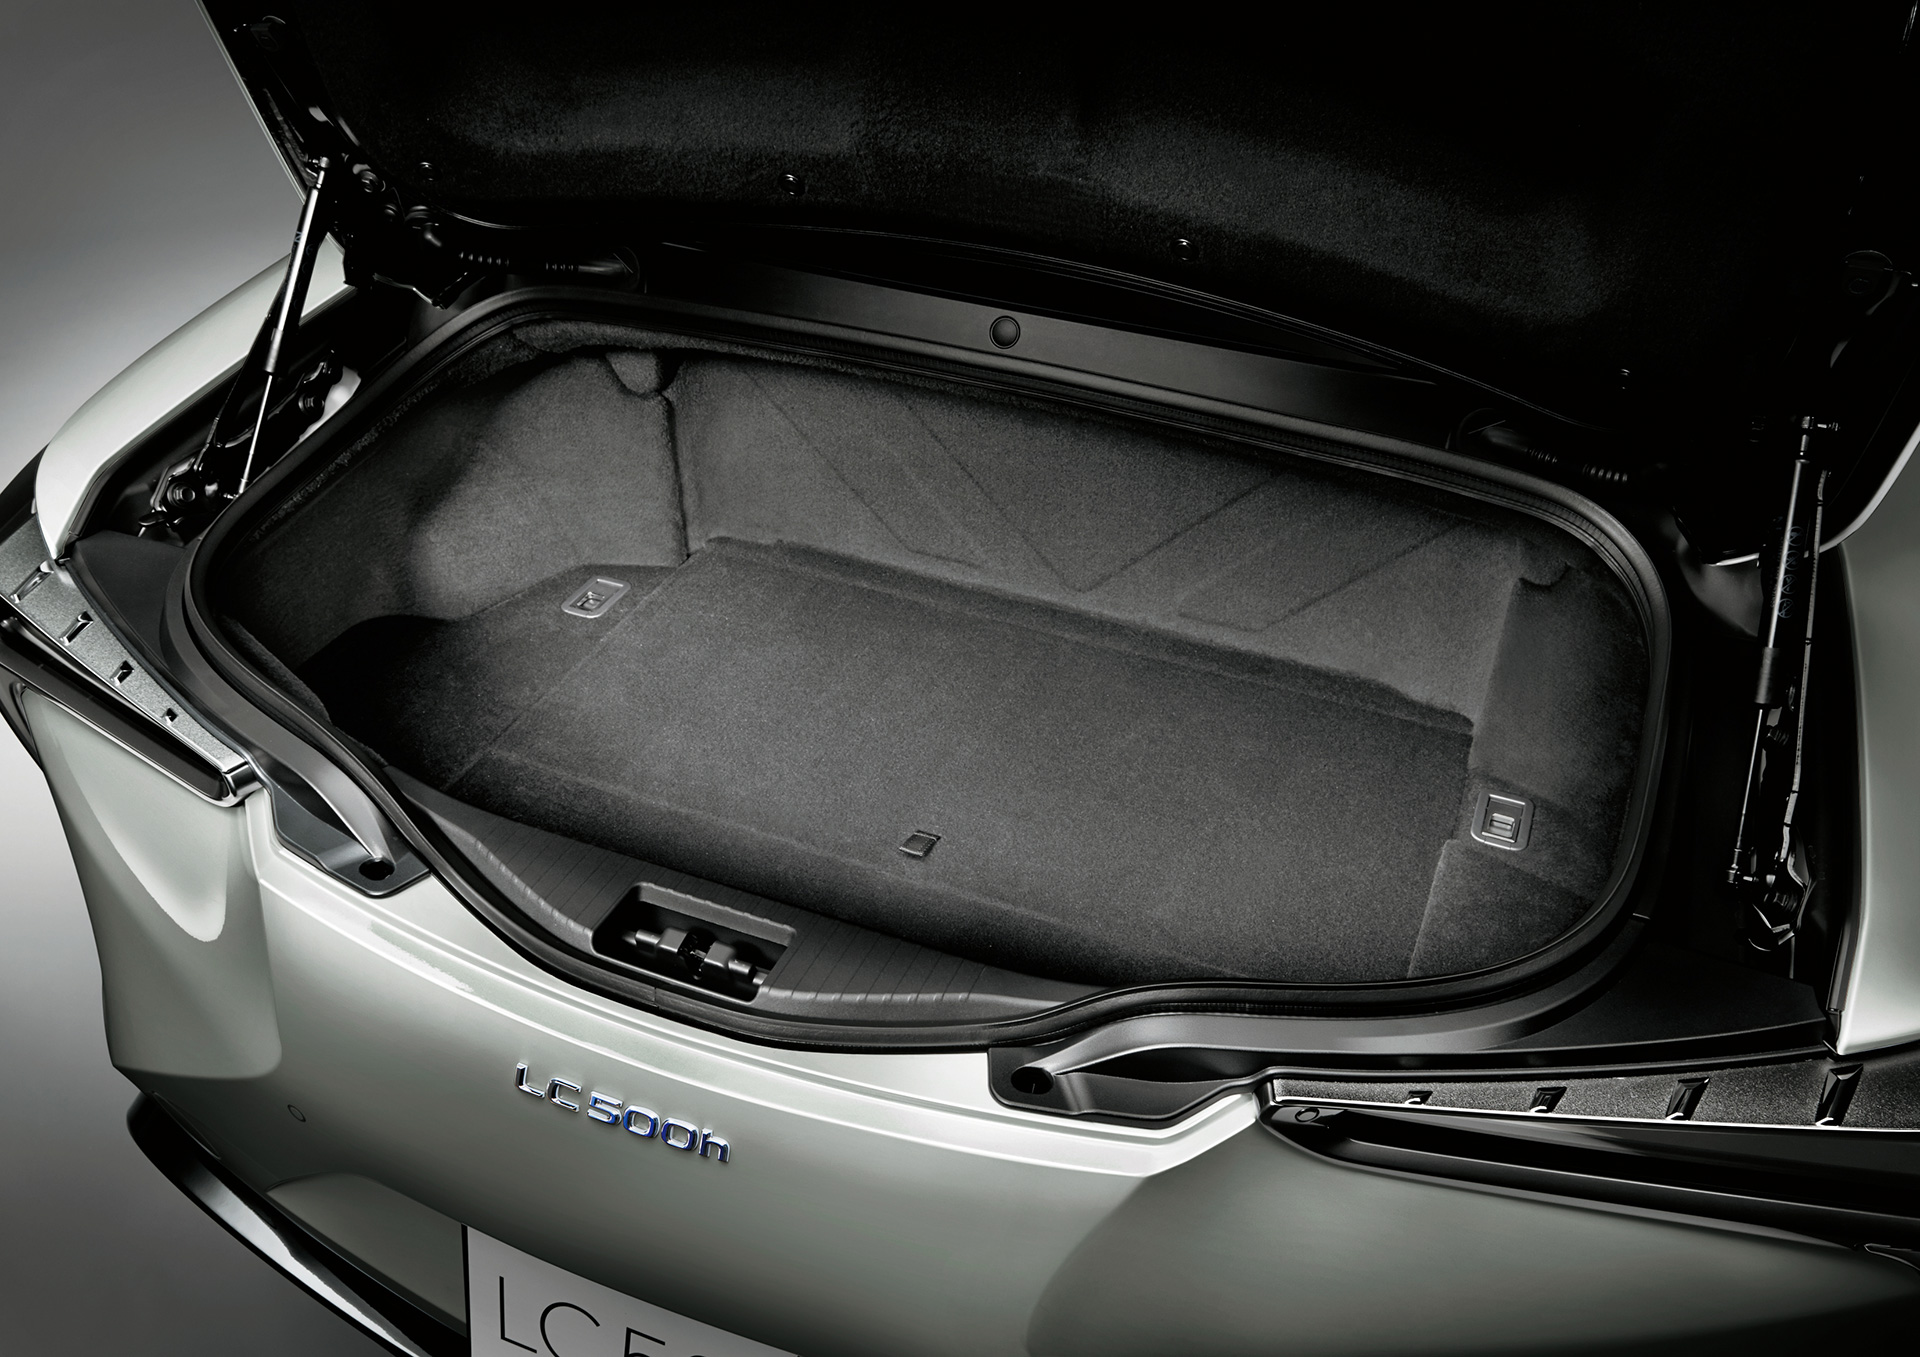 Luggage Space (LC 500h)